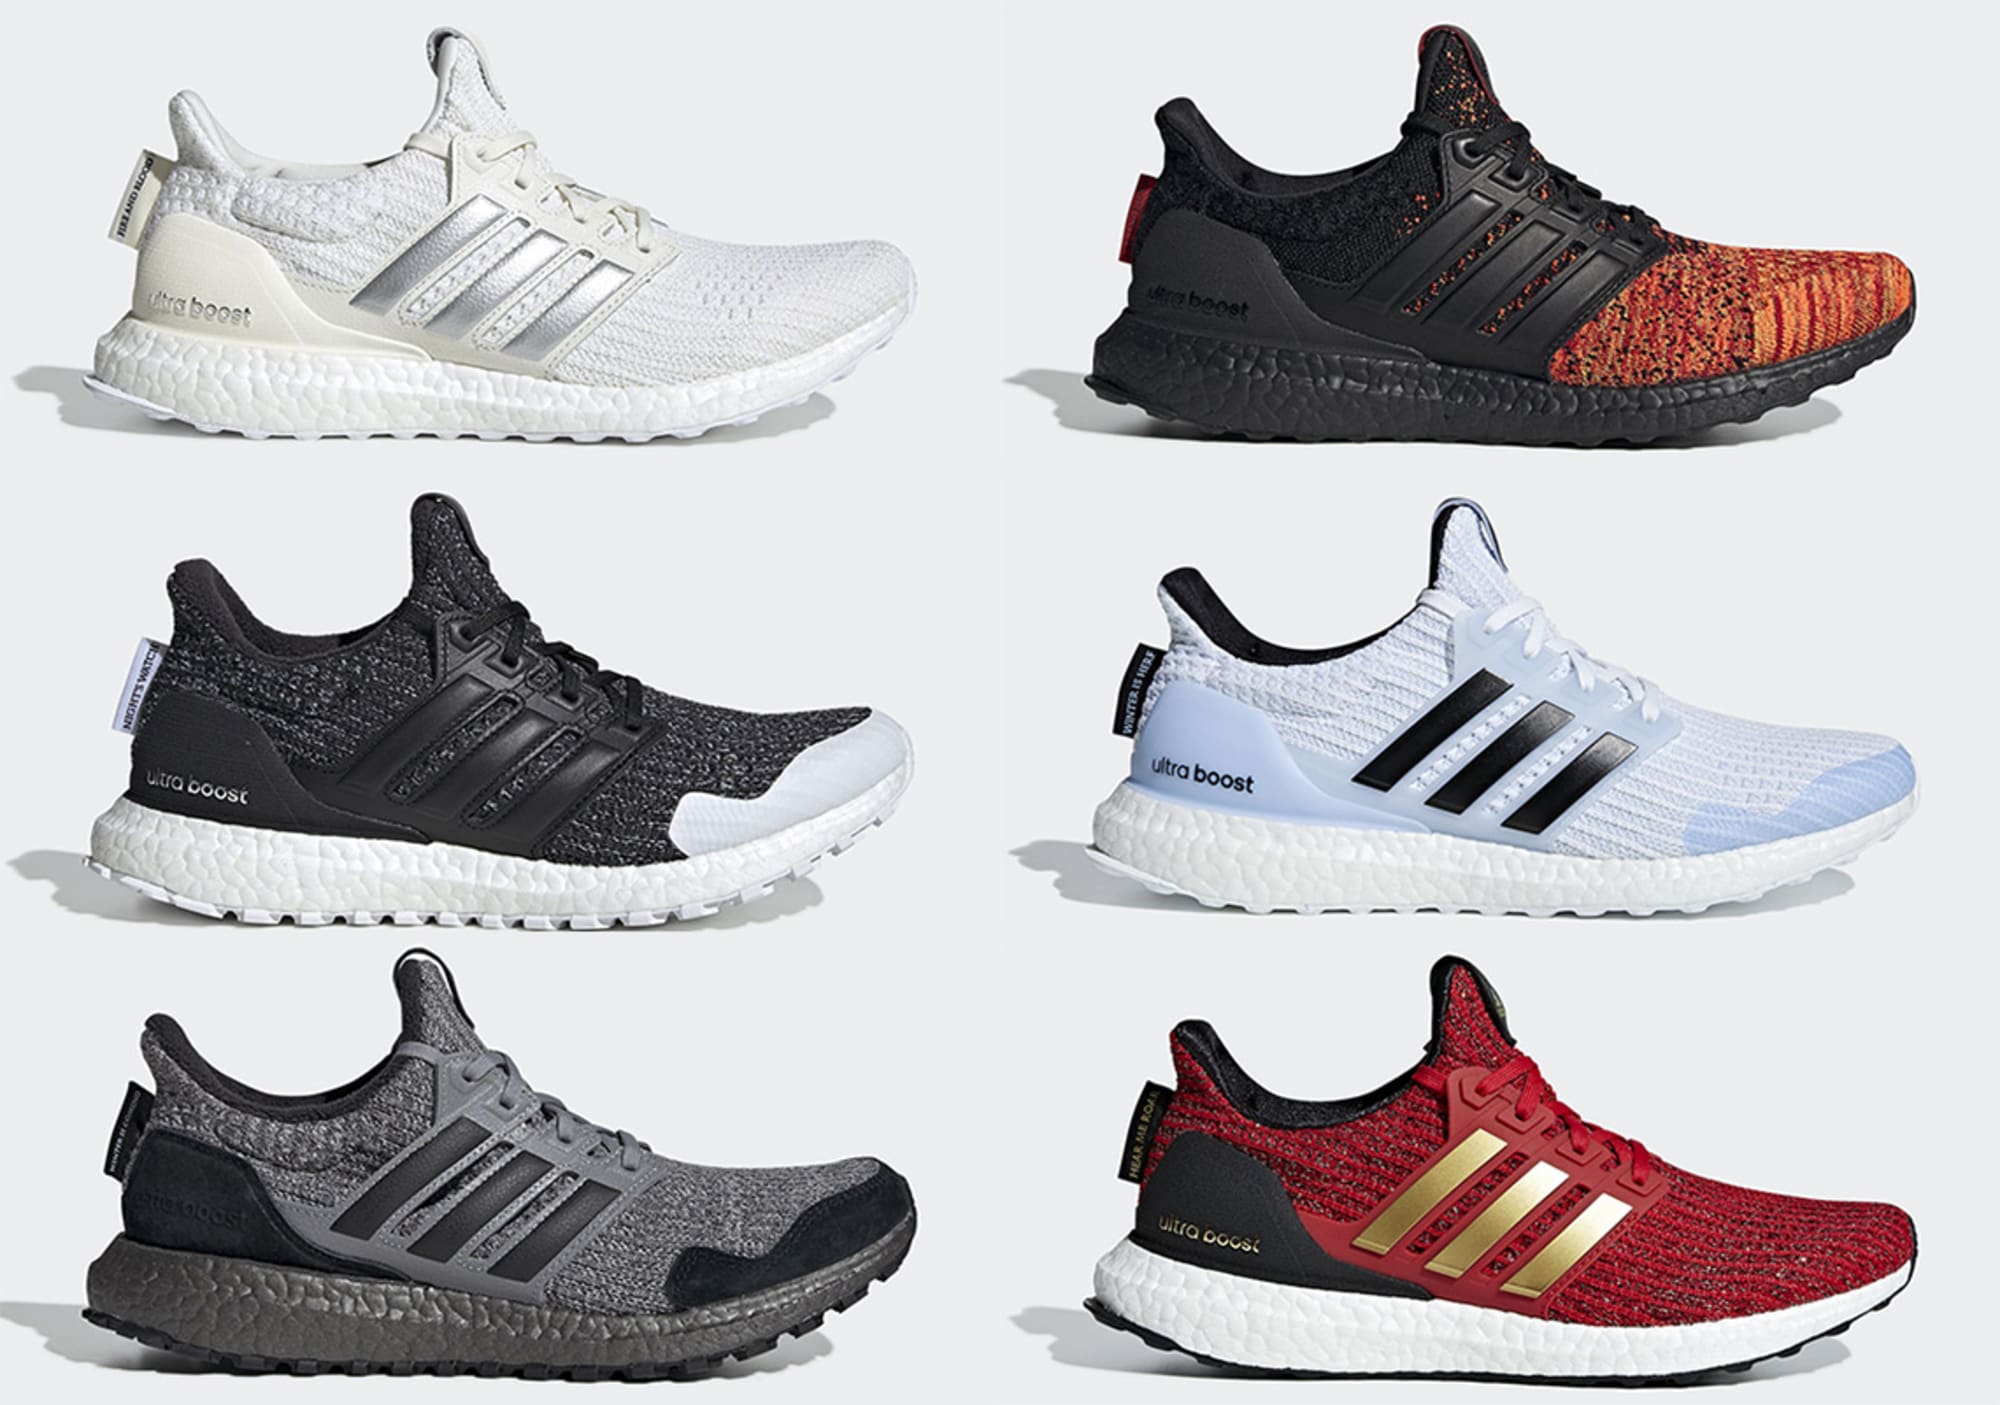 Adidas reveals full Game of Thrones sneaker collection